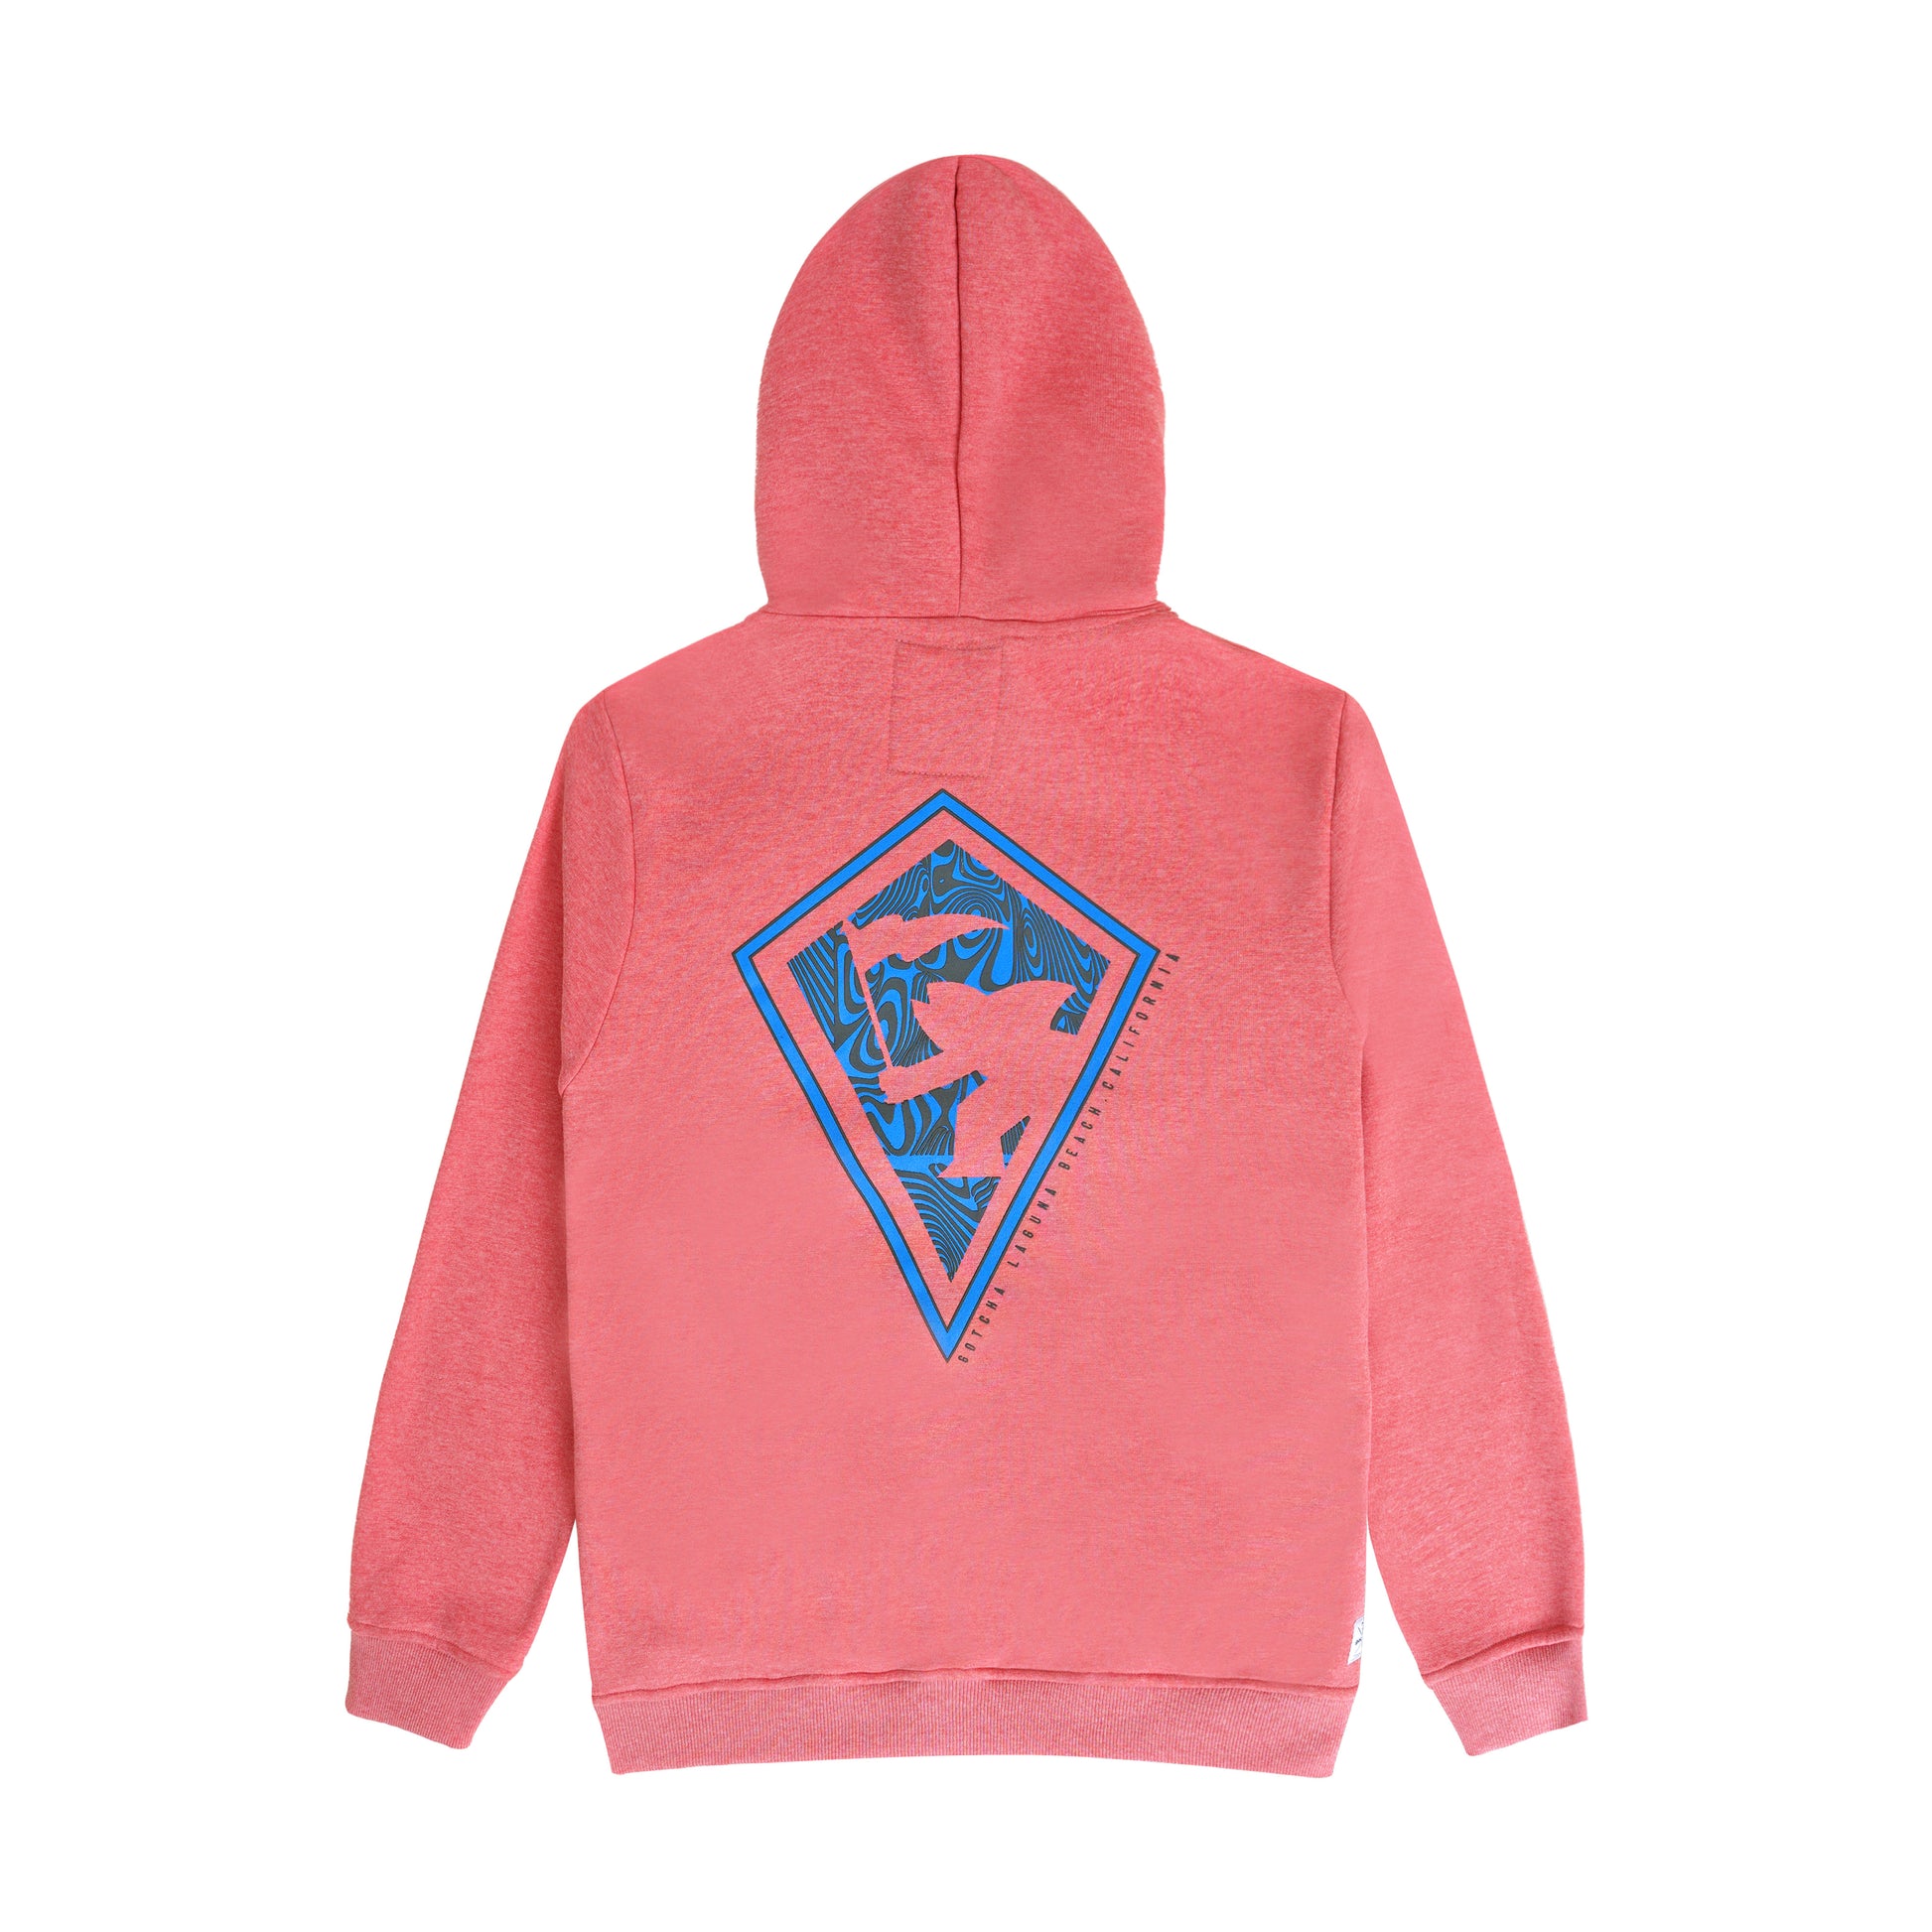 Coral chine hoodies for men